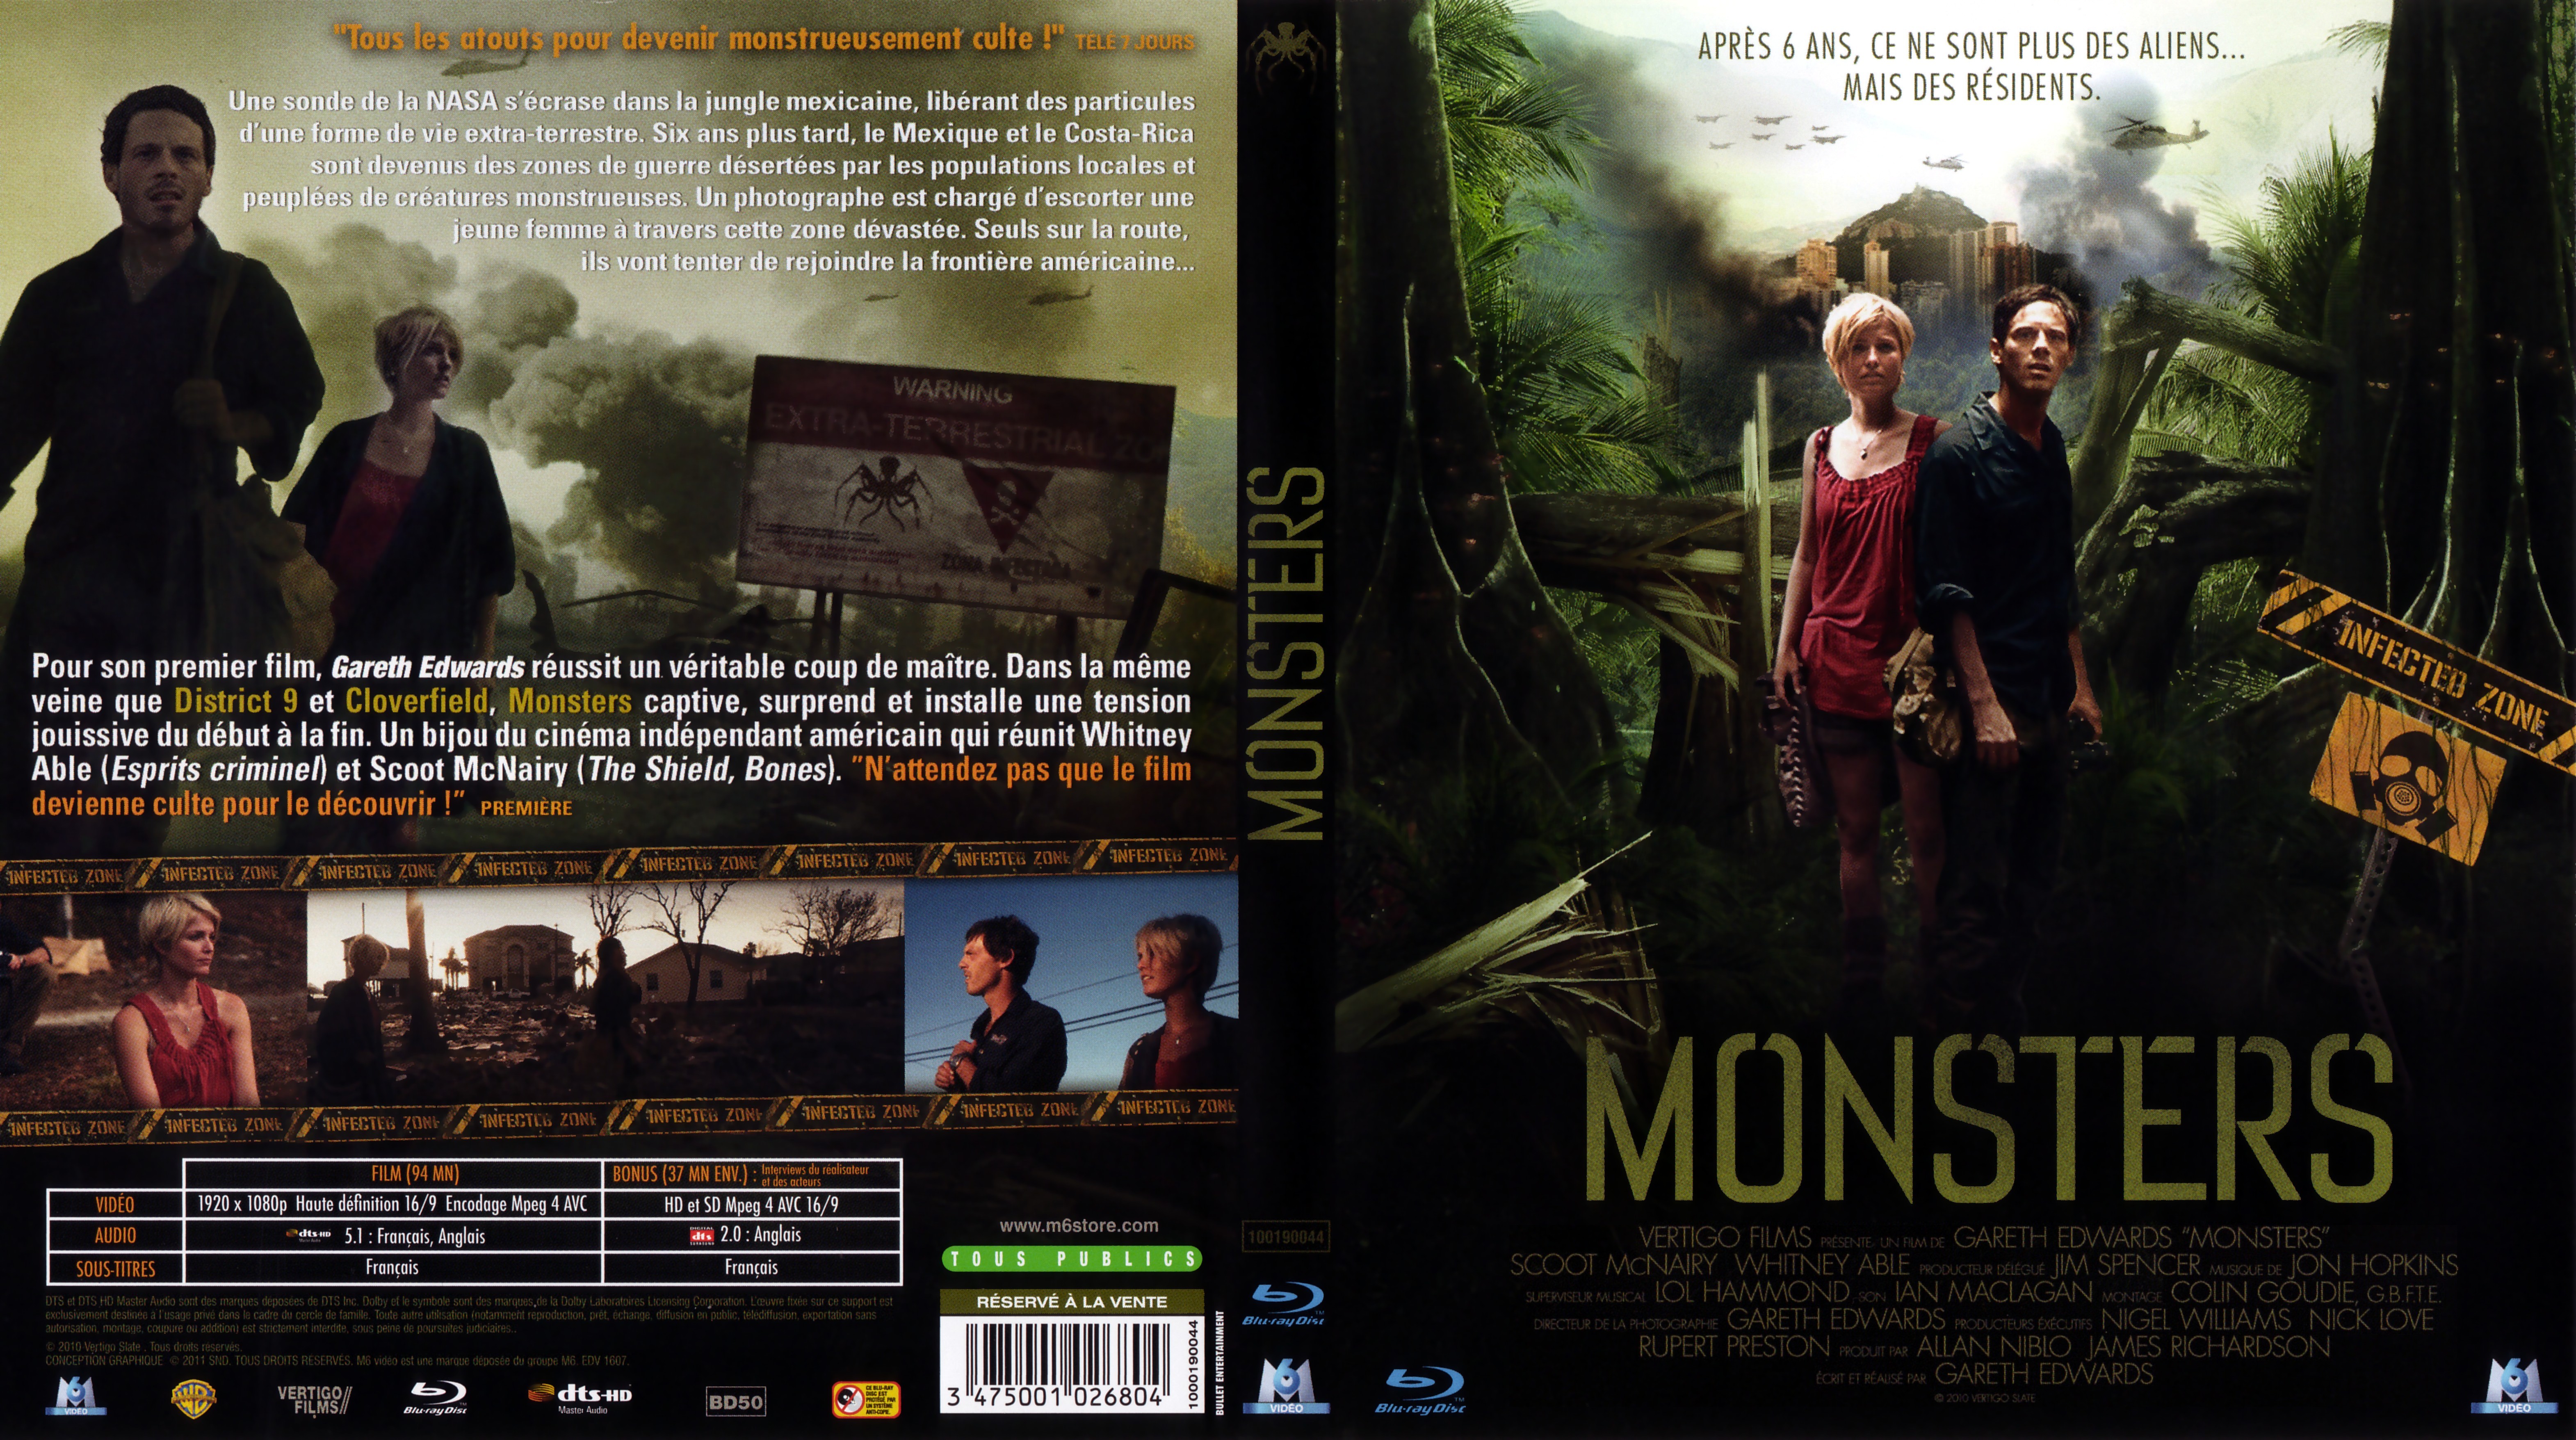 Jaquette DVD Monsters (BLU-RAY)